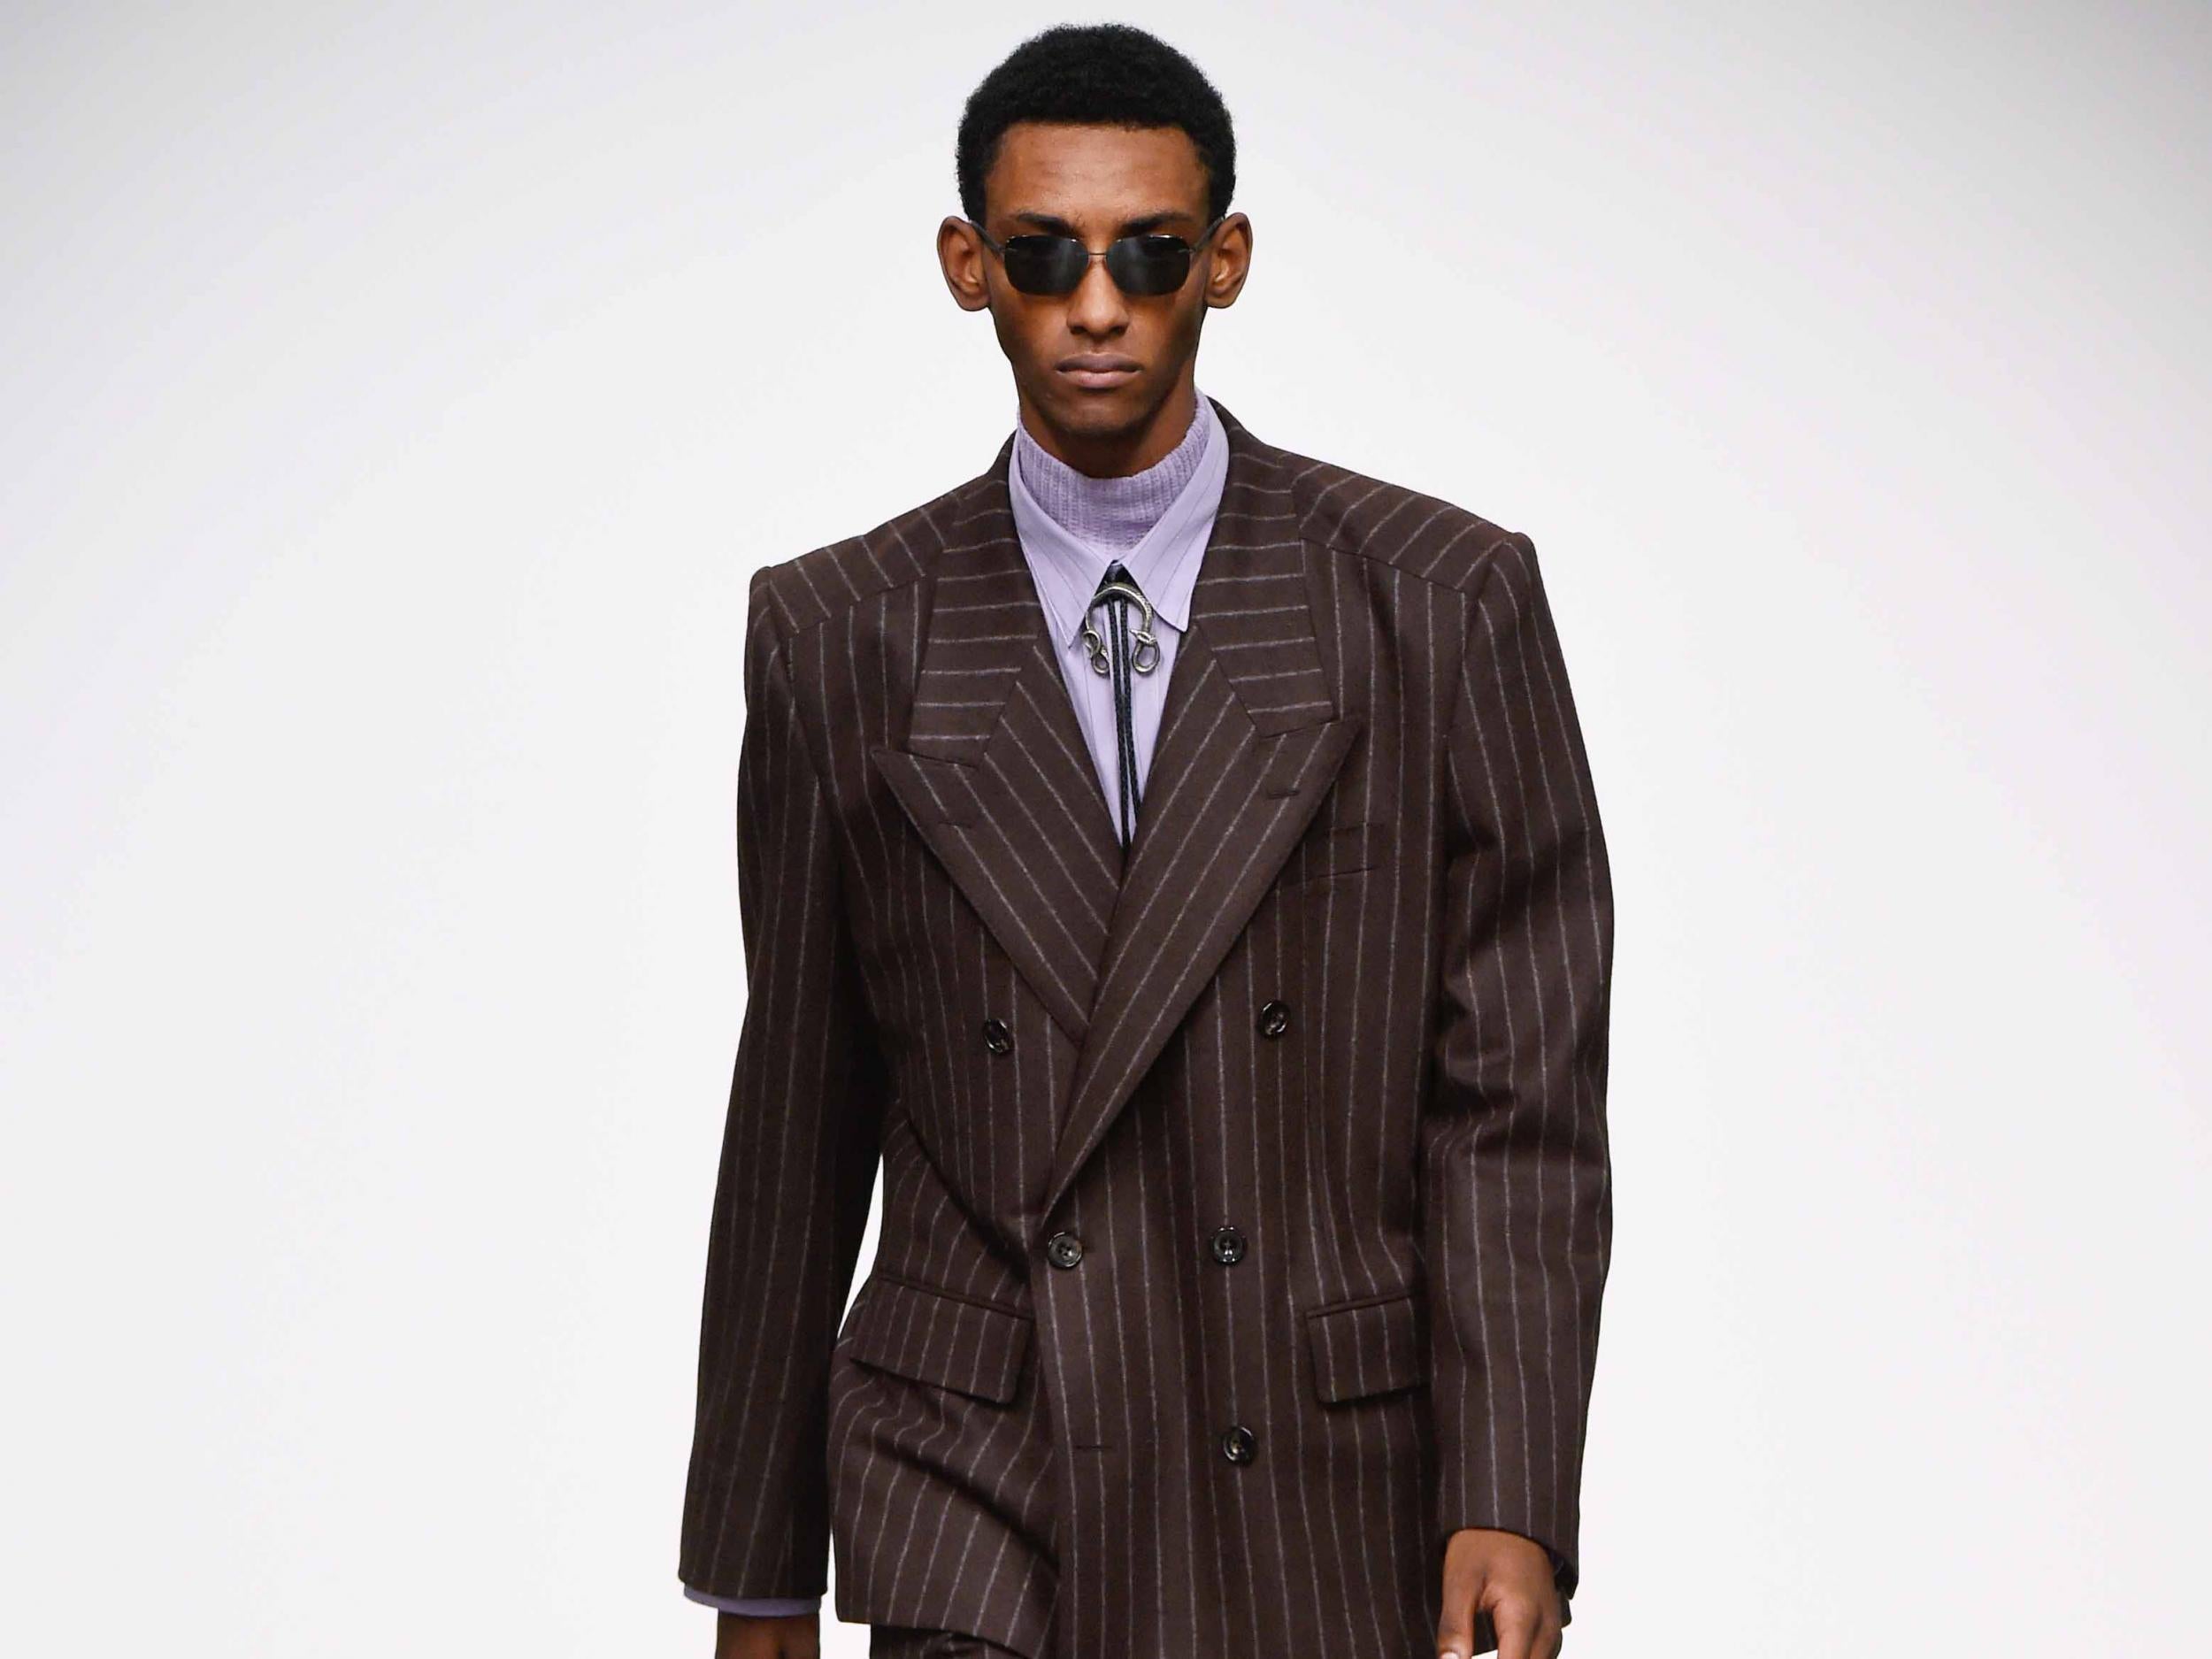 The classic pinstripe suit is making a comeback